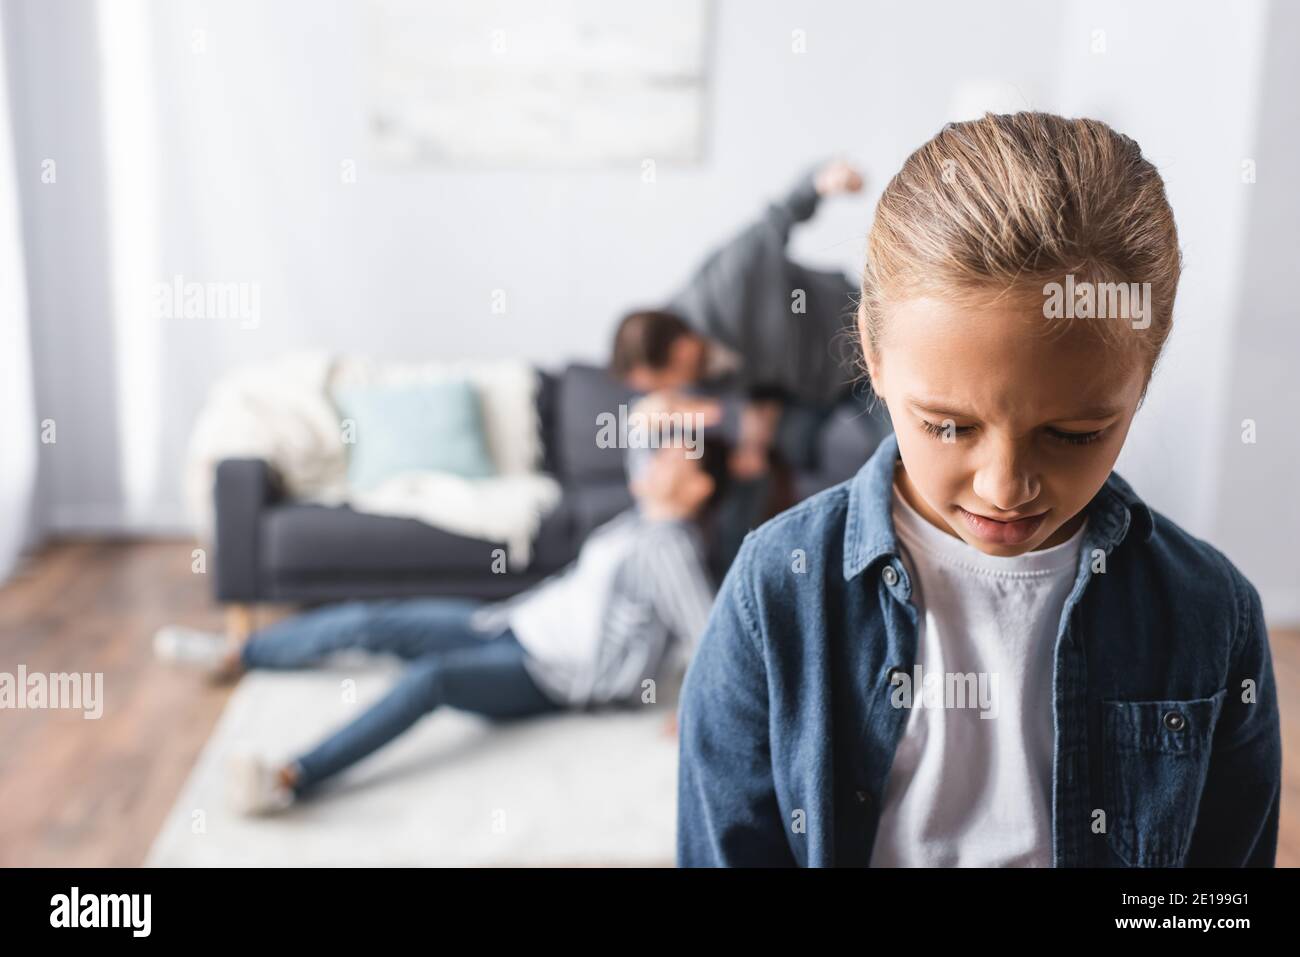 Crying girl standing near father beating mother on floor in living room on blurred background Stock Photo